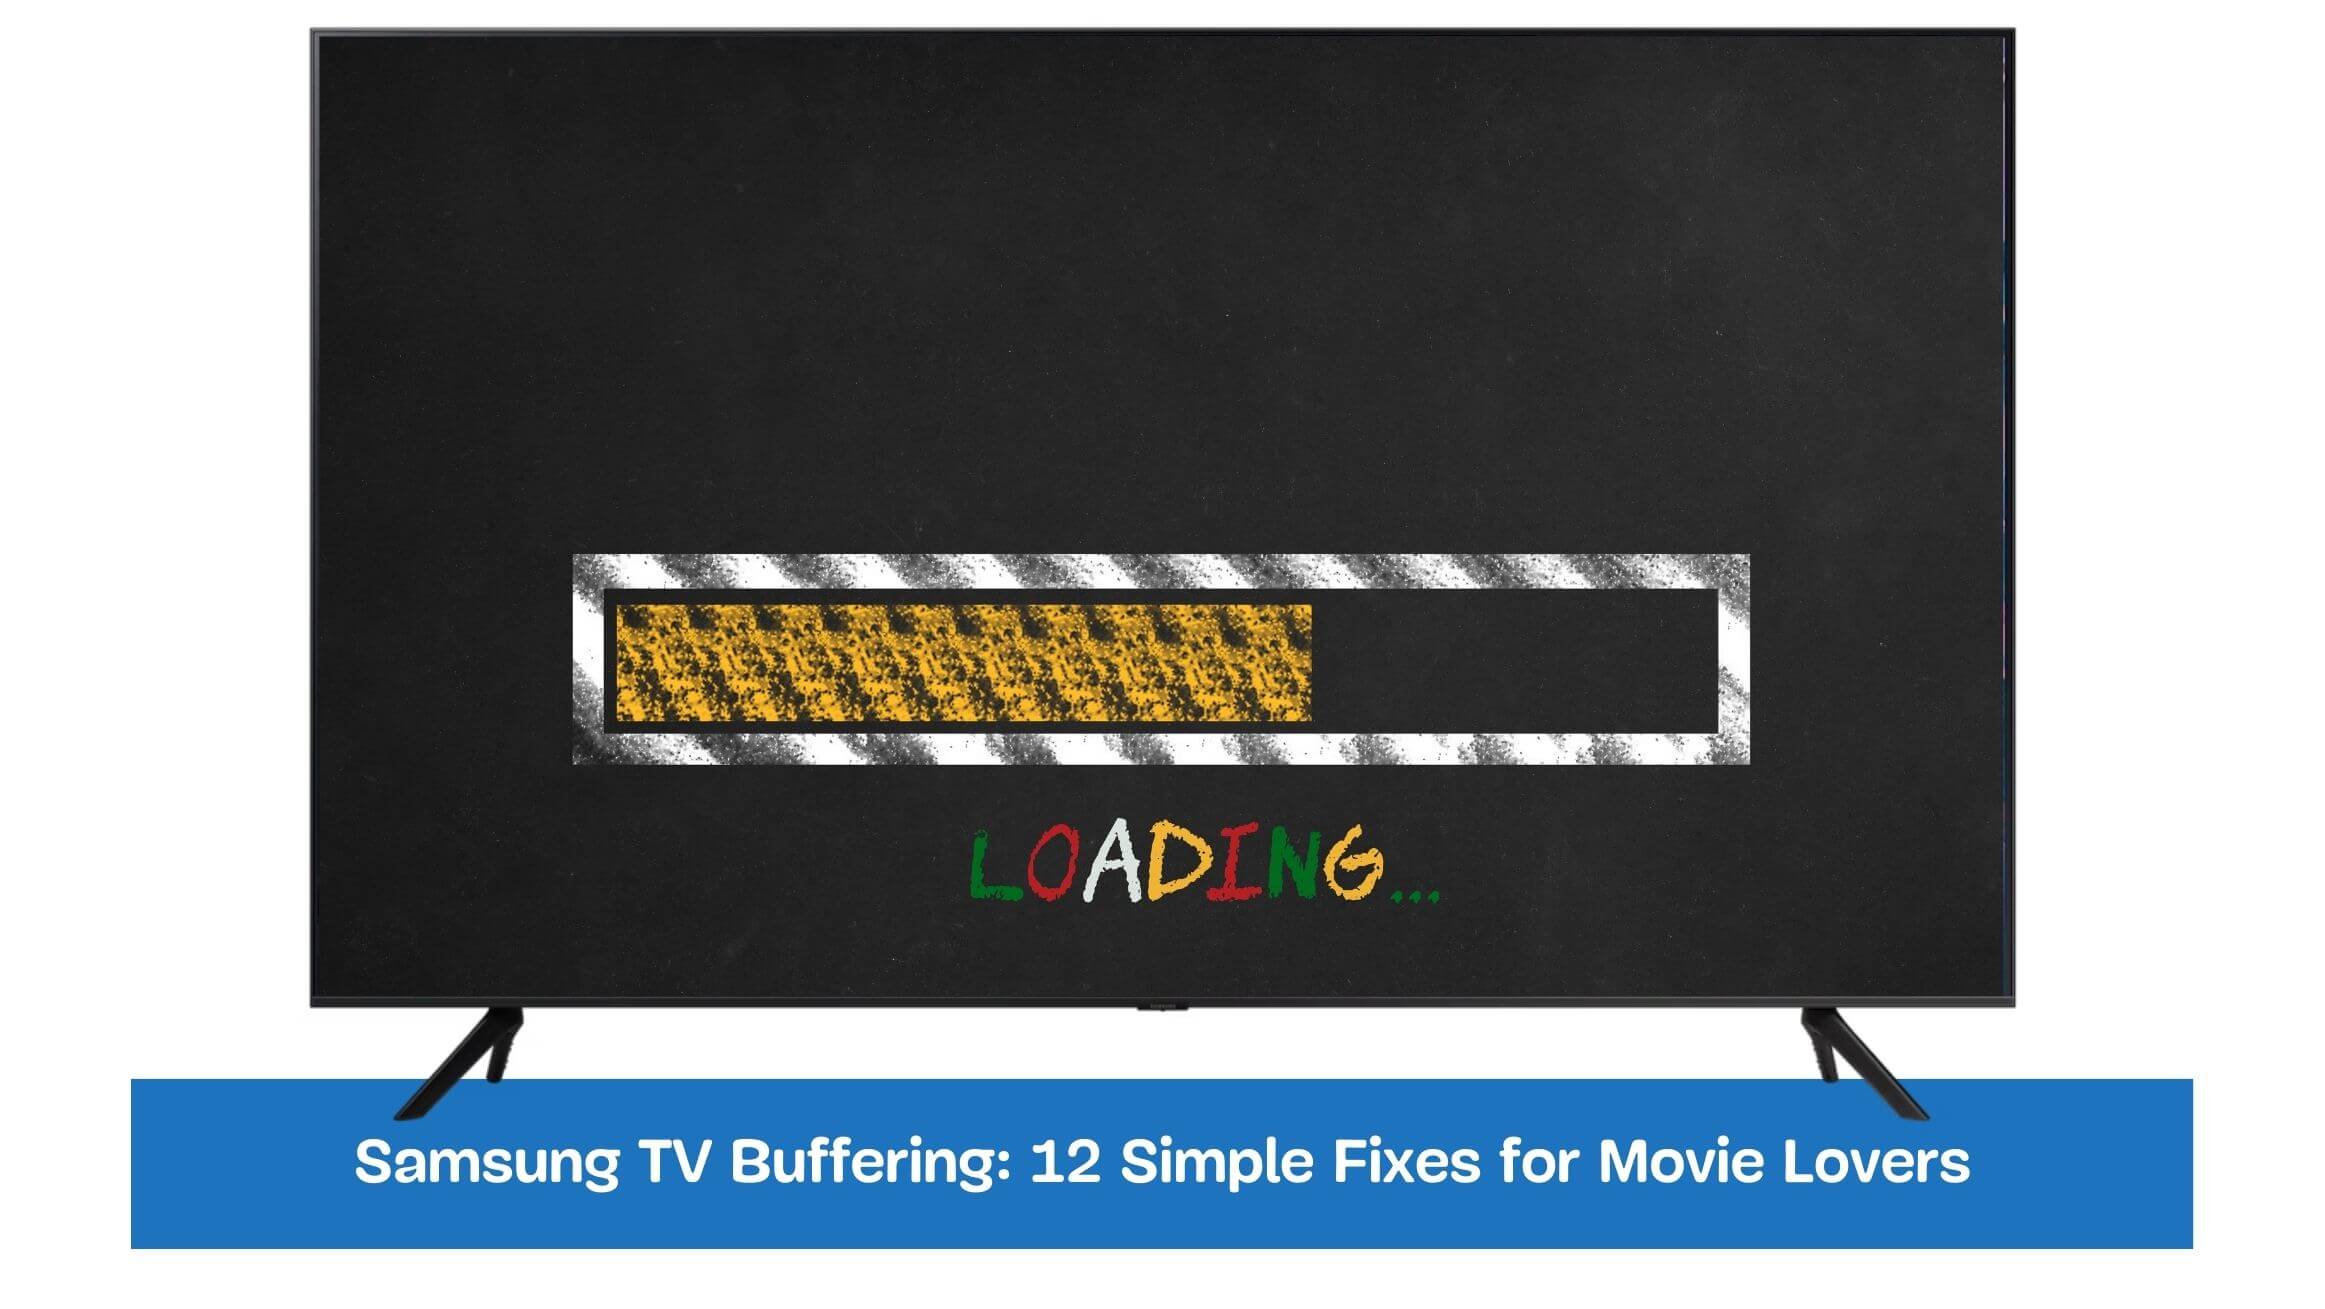 Samsung TV Buffering: 12 Simple Fixes for Movie Lovers